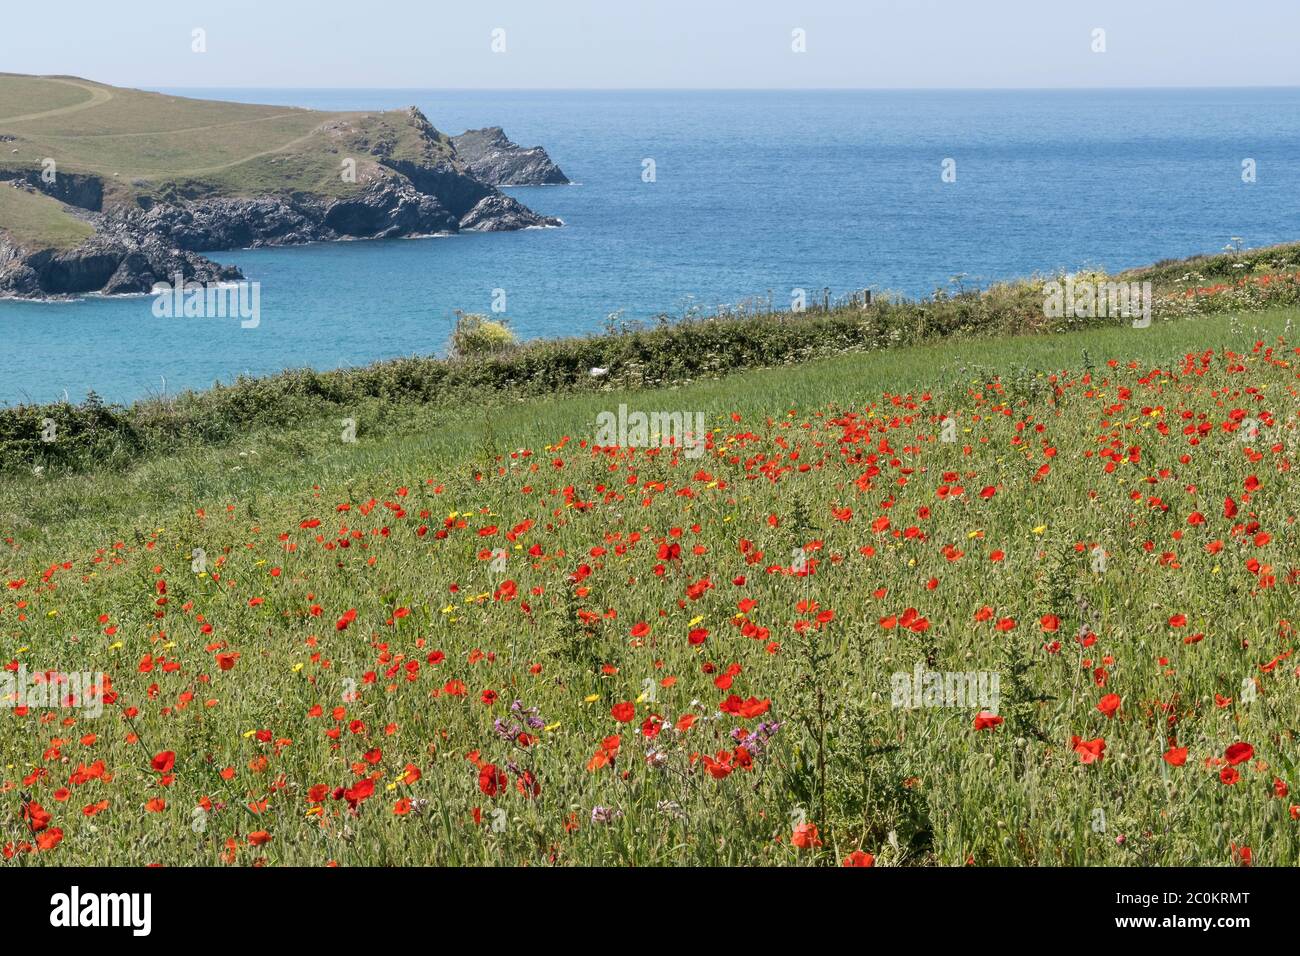 The spectacular sight of Common Poppies Papaver rhoeas growing in a field overlooking Polly Porth Joke as part of the Arable Fields Project on Pentire Stock Photo